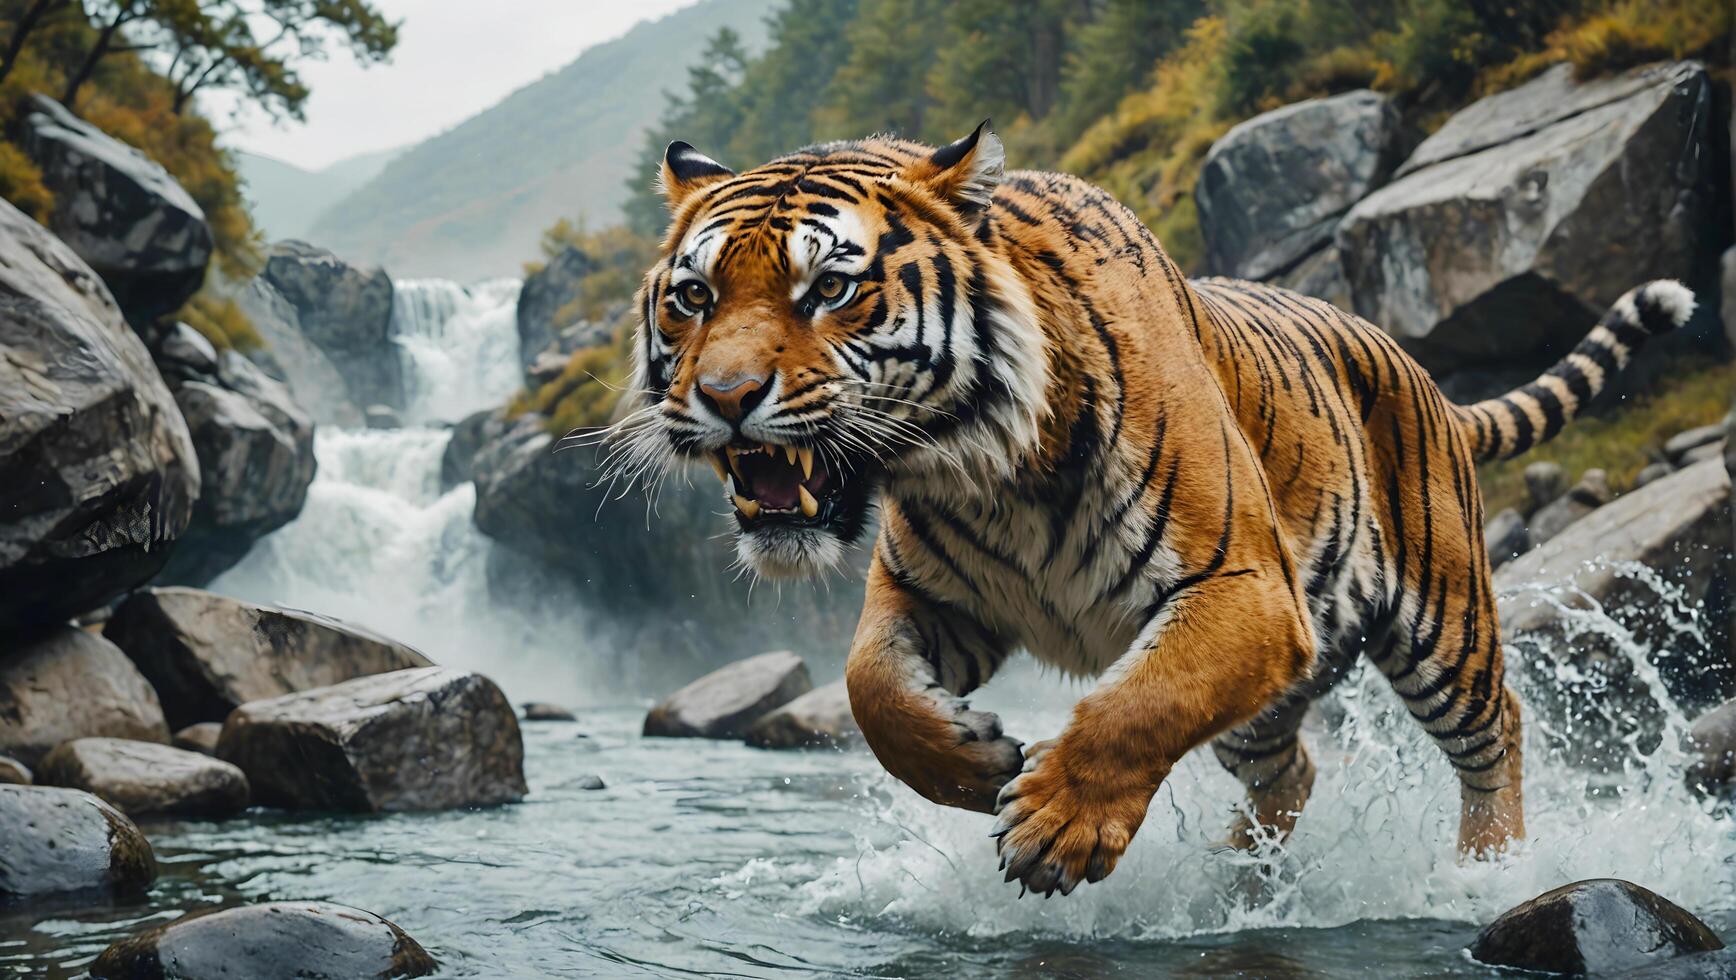 Fierce tiger leaping in action out of river stream. Wilidlife Free Photo